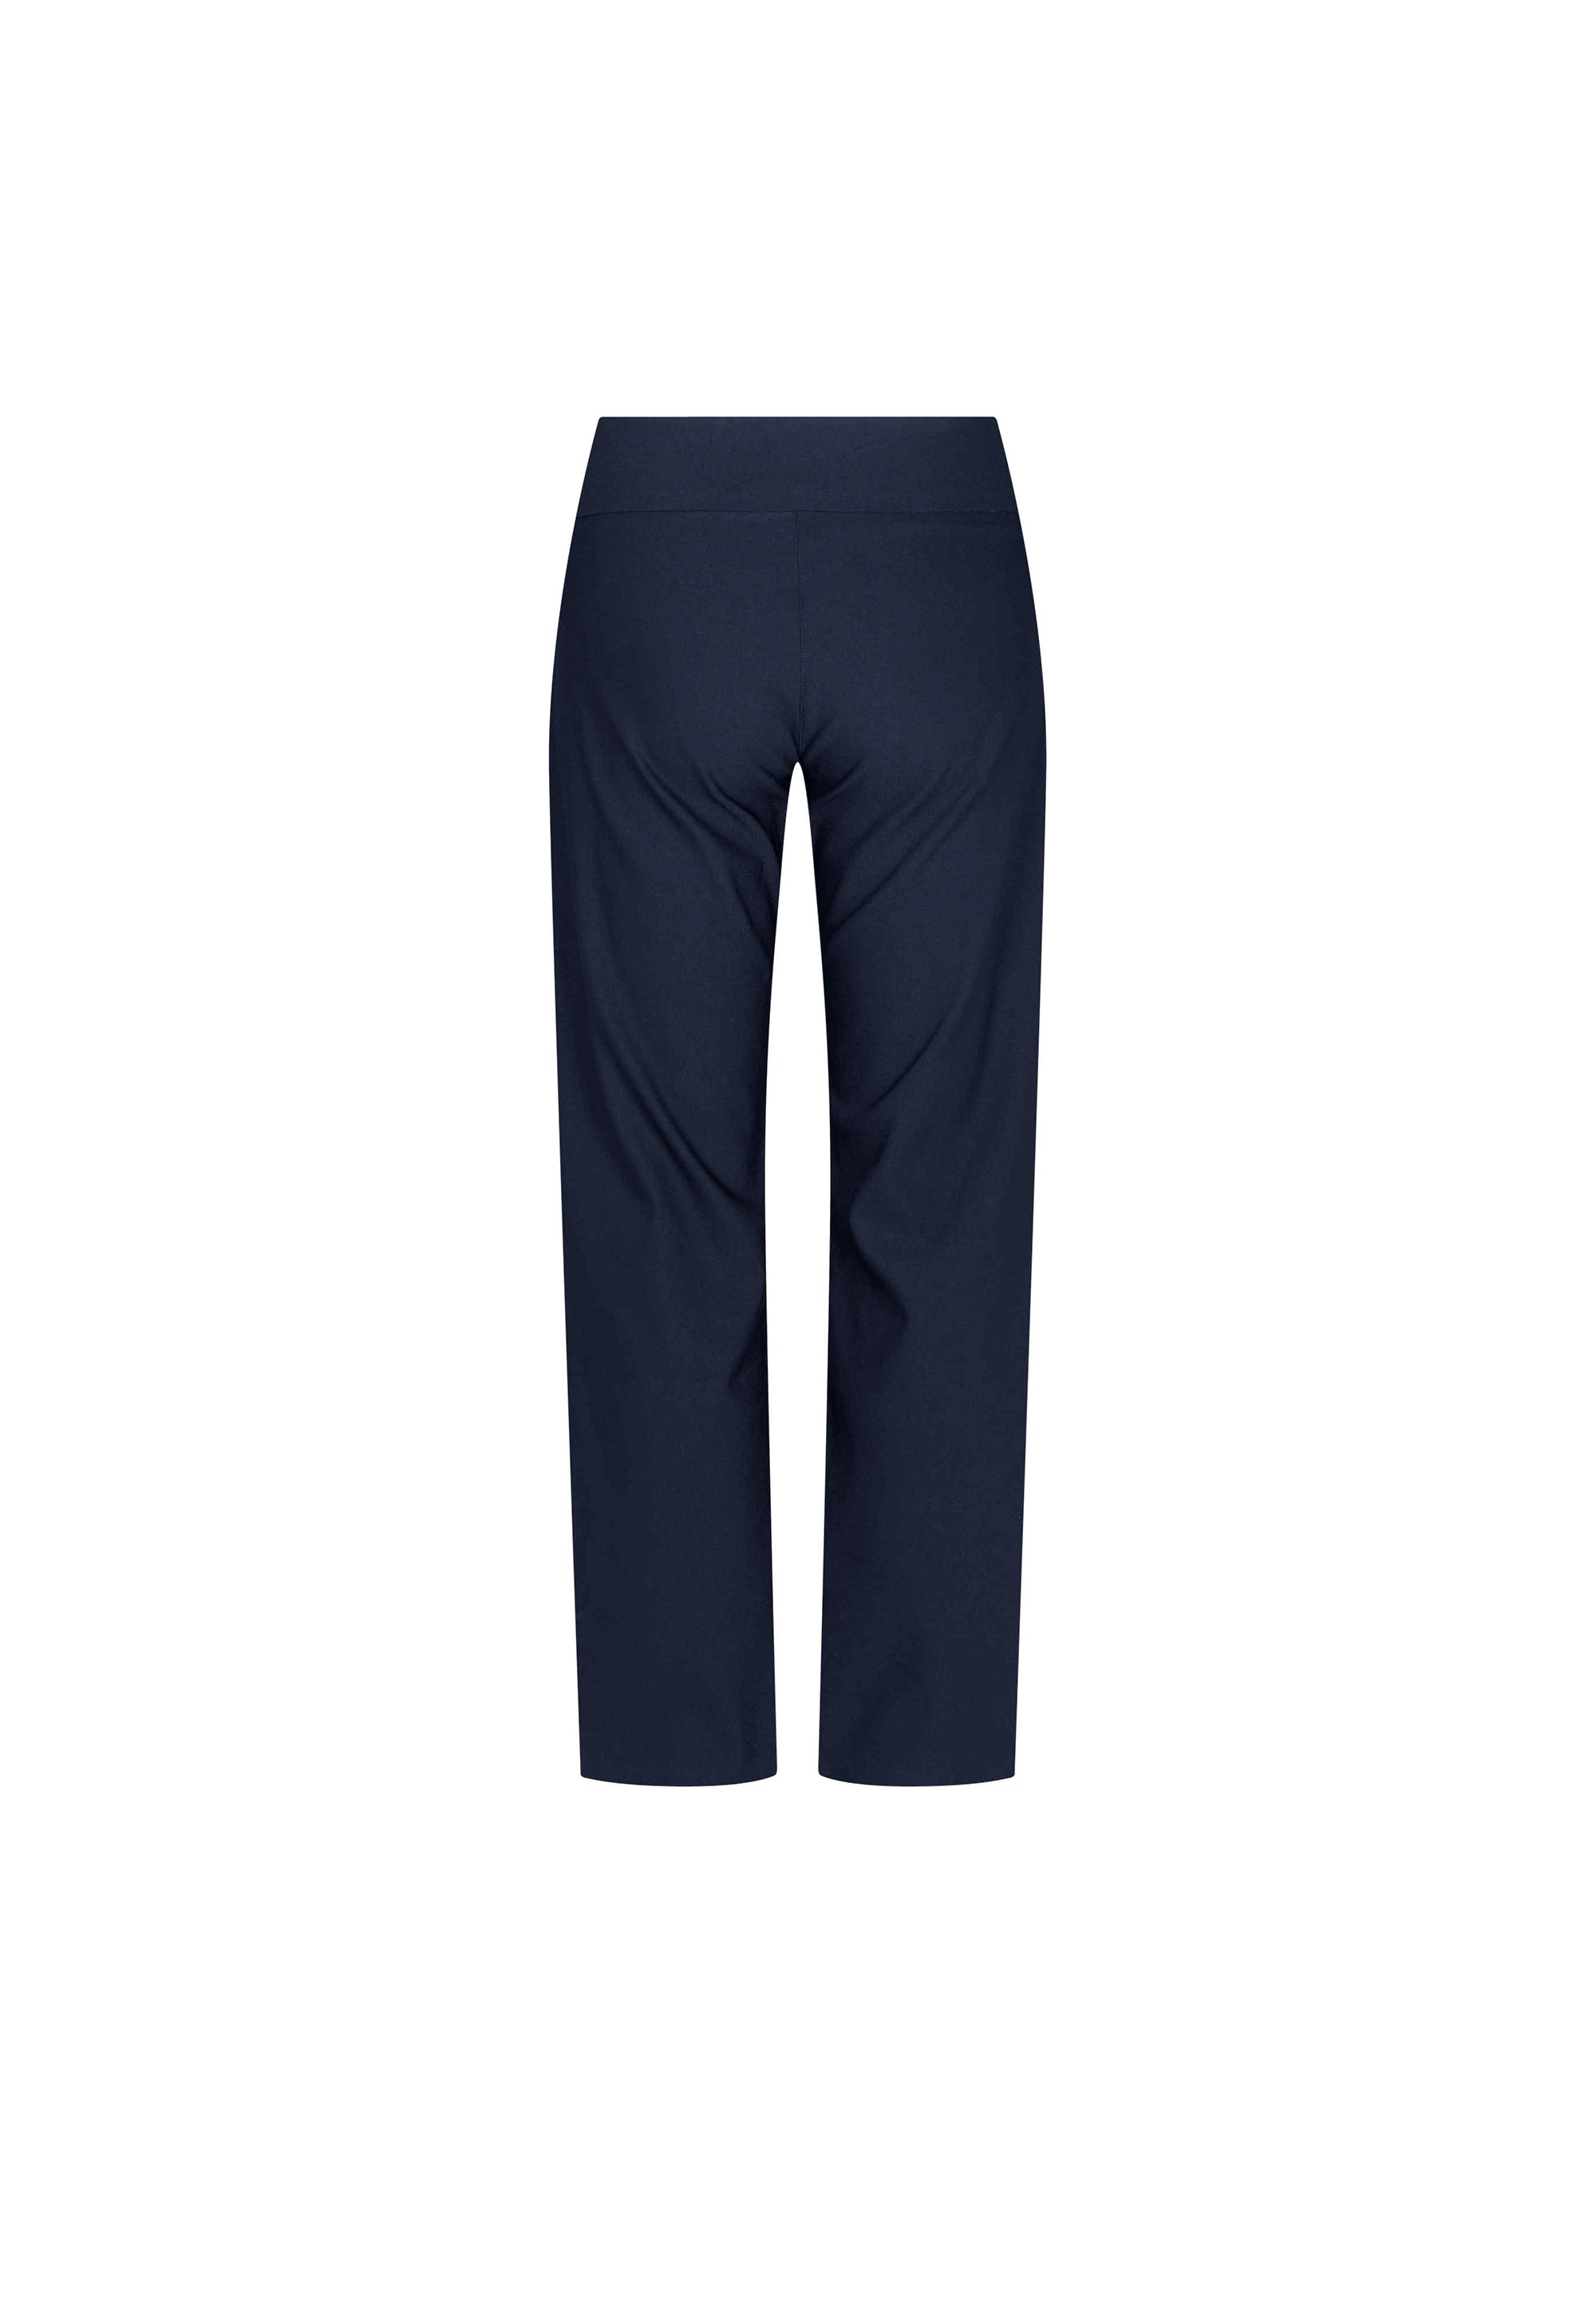 LAURIE Thea Straight - Short Length Trousers STRAIGHT 49000 Navy